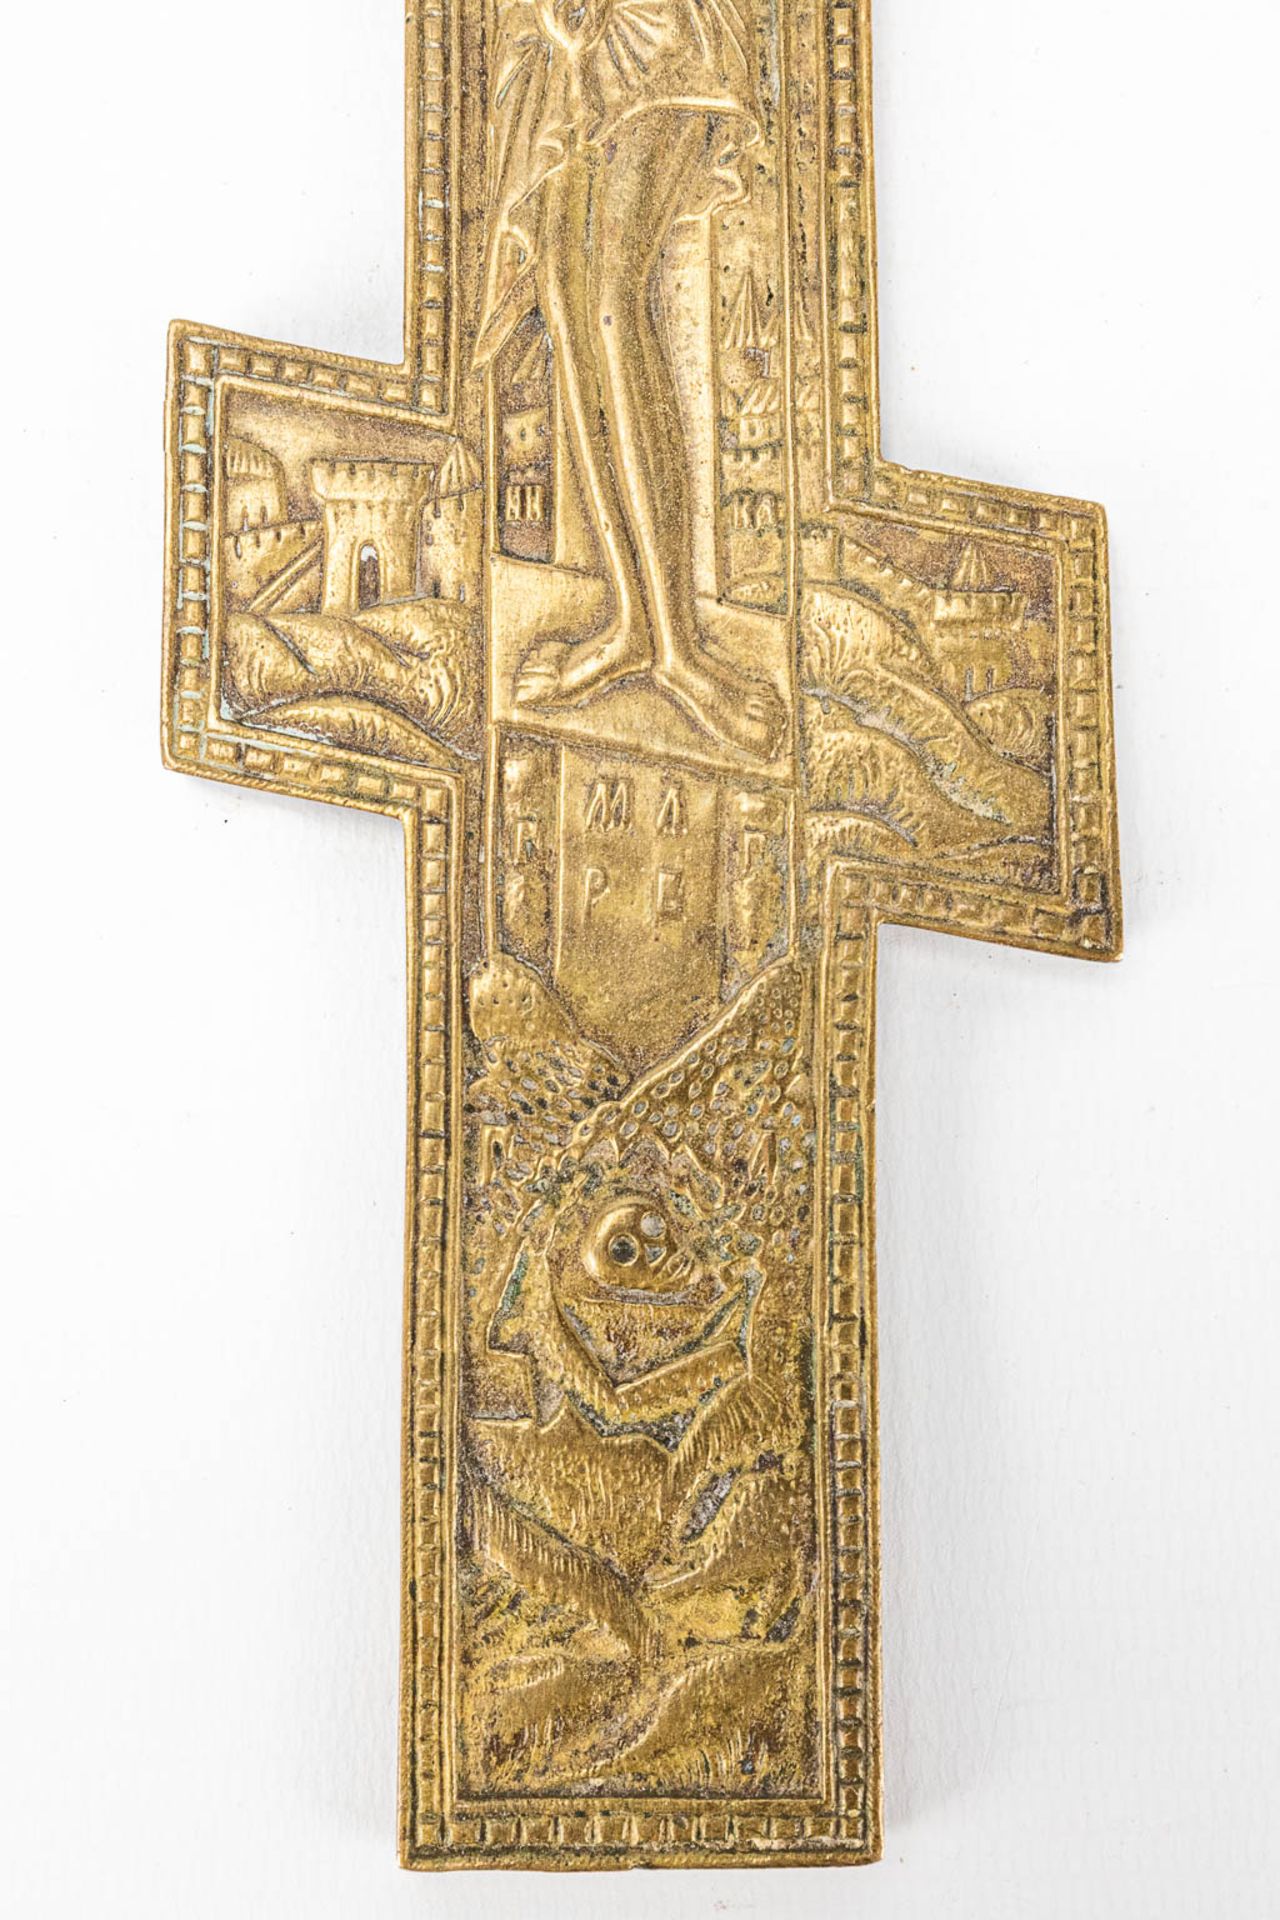 A bronze crucifix, made in Russia during the 19th century. - Image 7 of 7